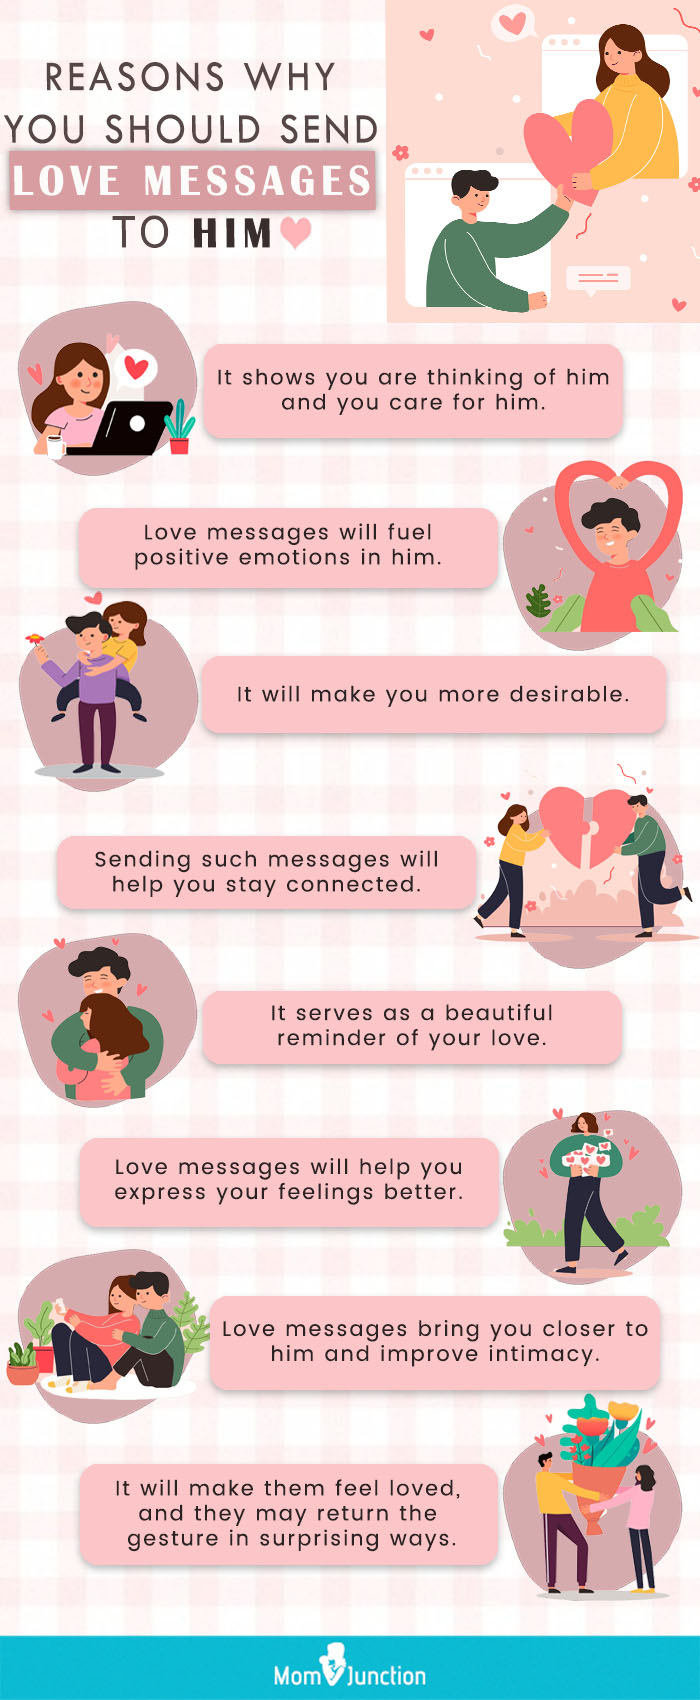 reasons why you should send love messages [infographic]